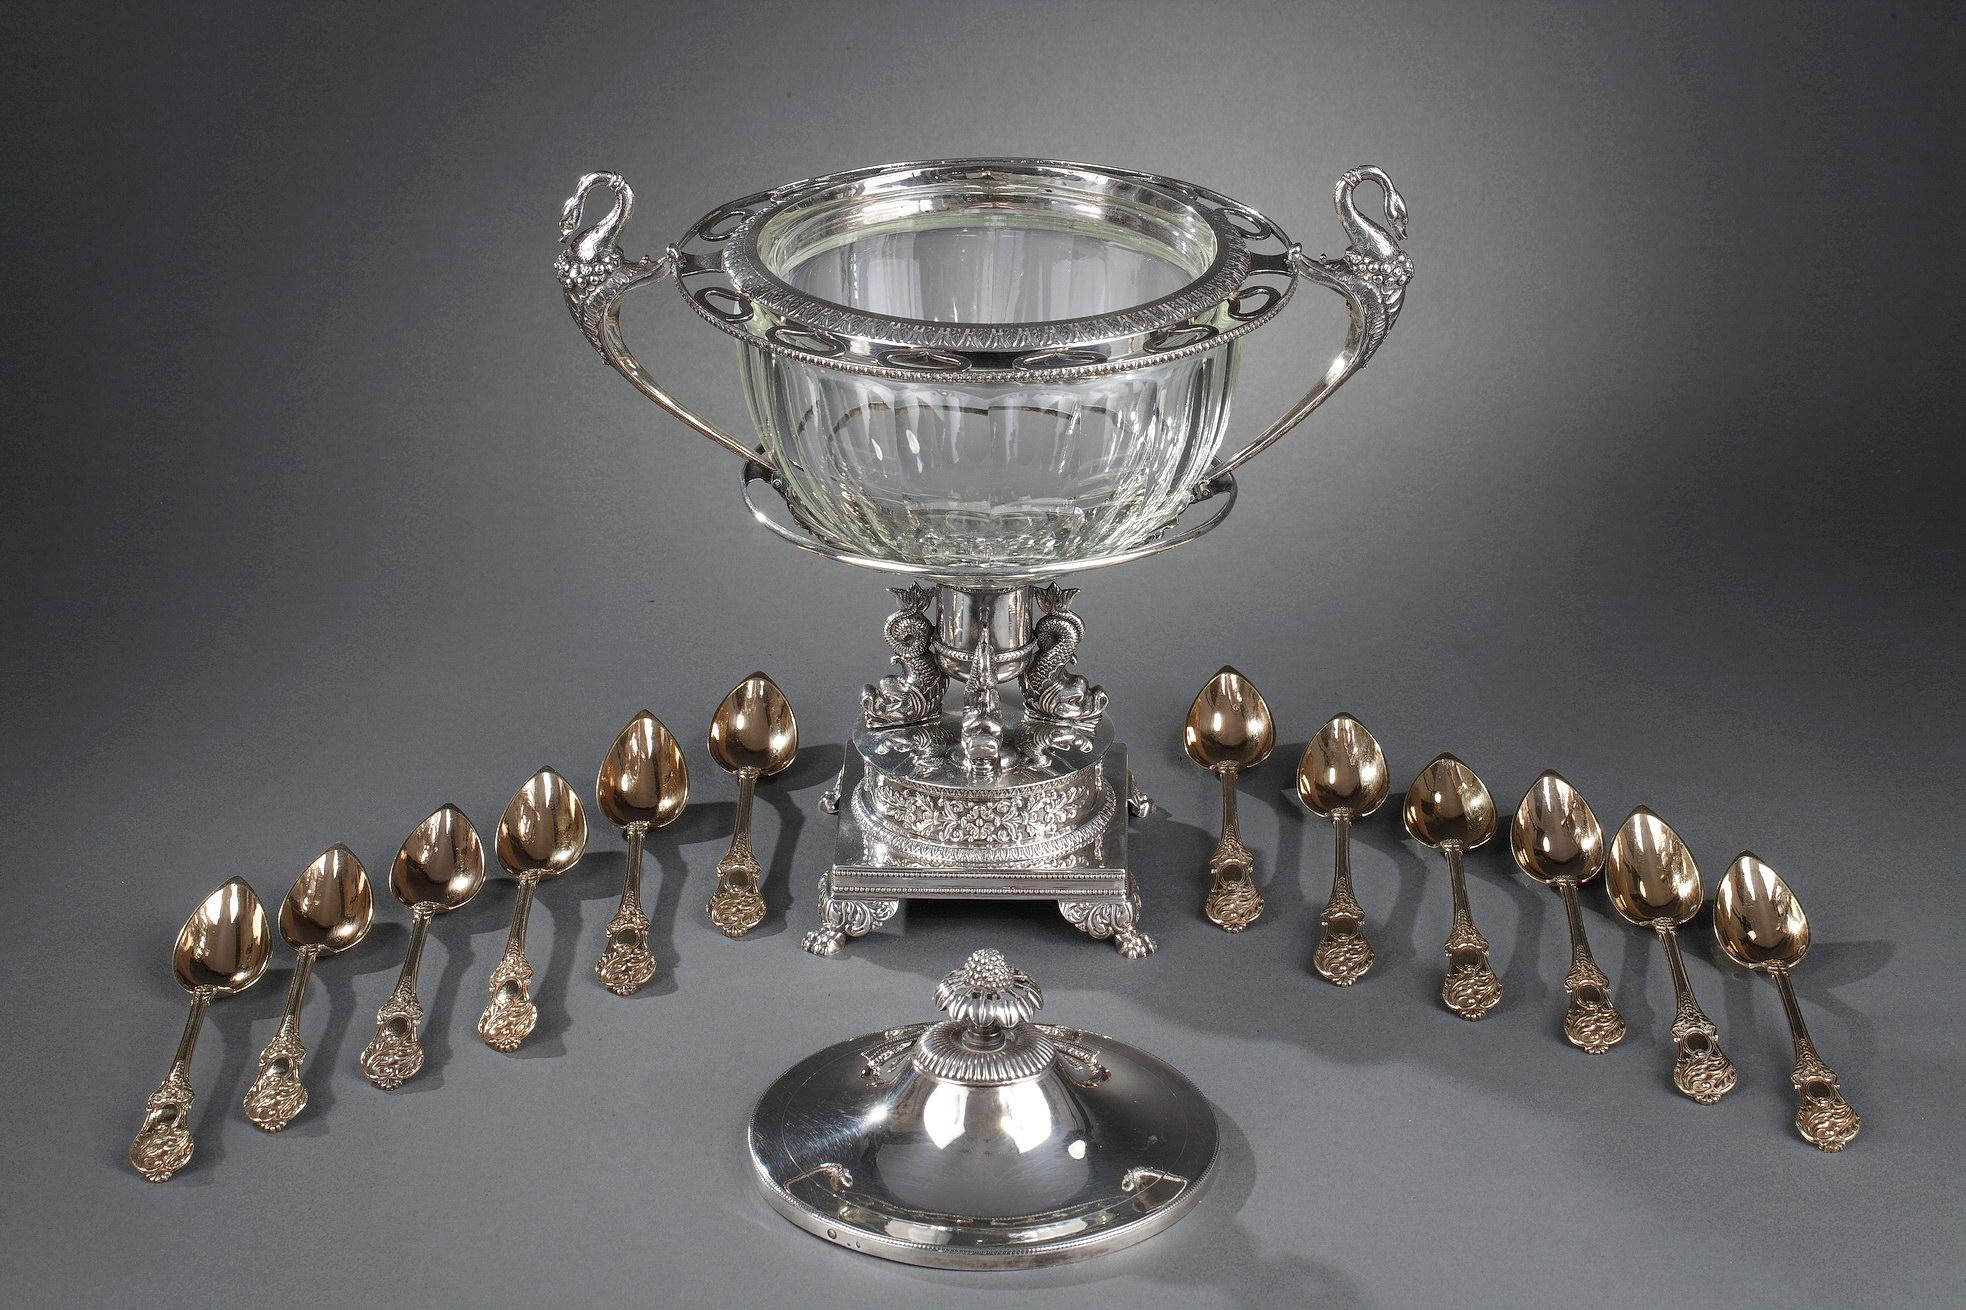 Silver and cut-crystal confiturier in Medici-shape decorated with two handles with floral motifs and volutes end in a swan's head. .The silver frame is adorned with laurel leaves and stylized palmettes. The confiturier dish rests on a raised foot